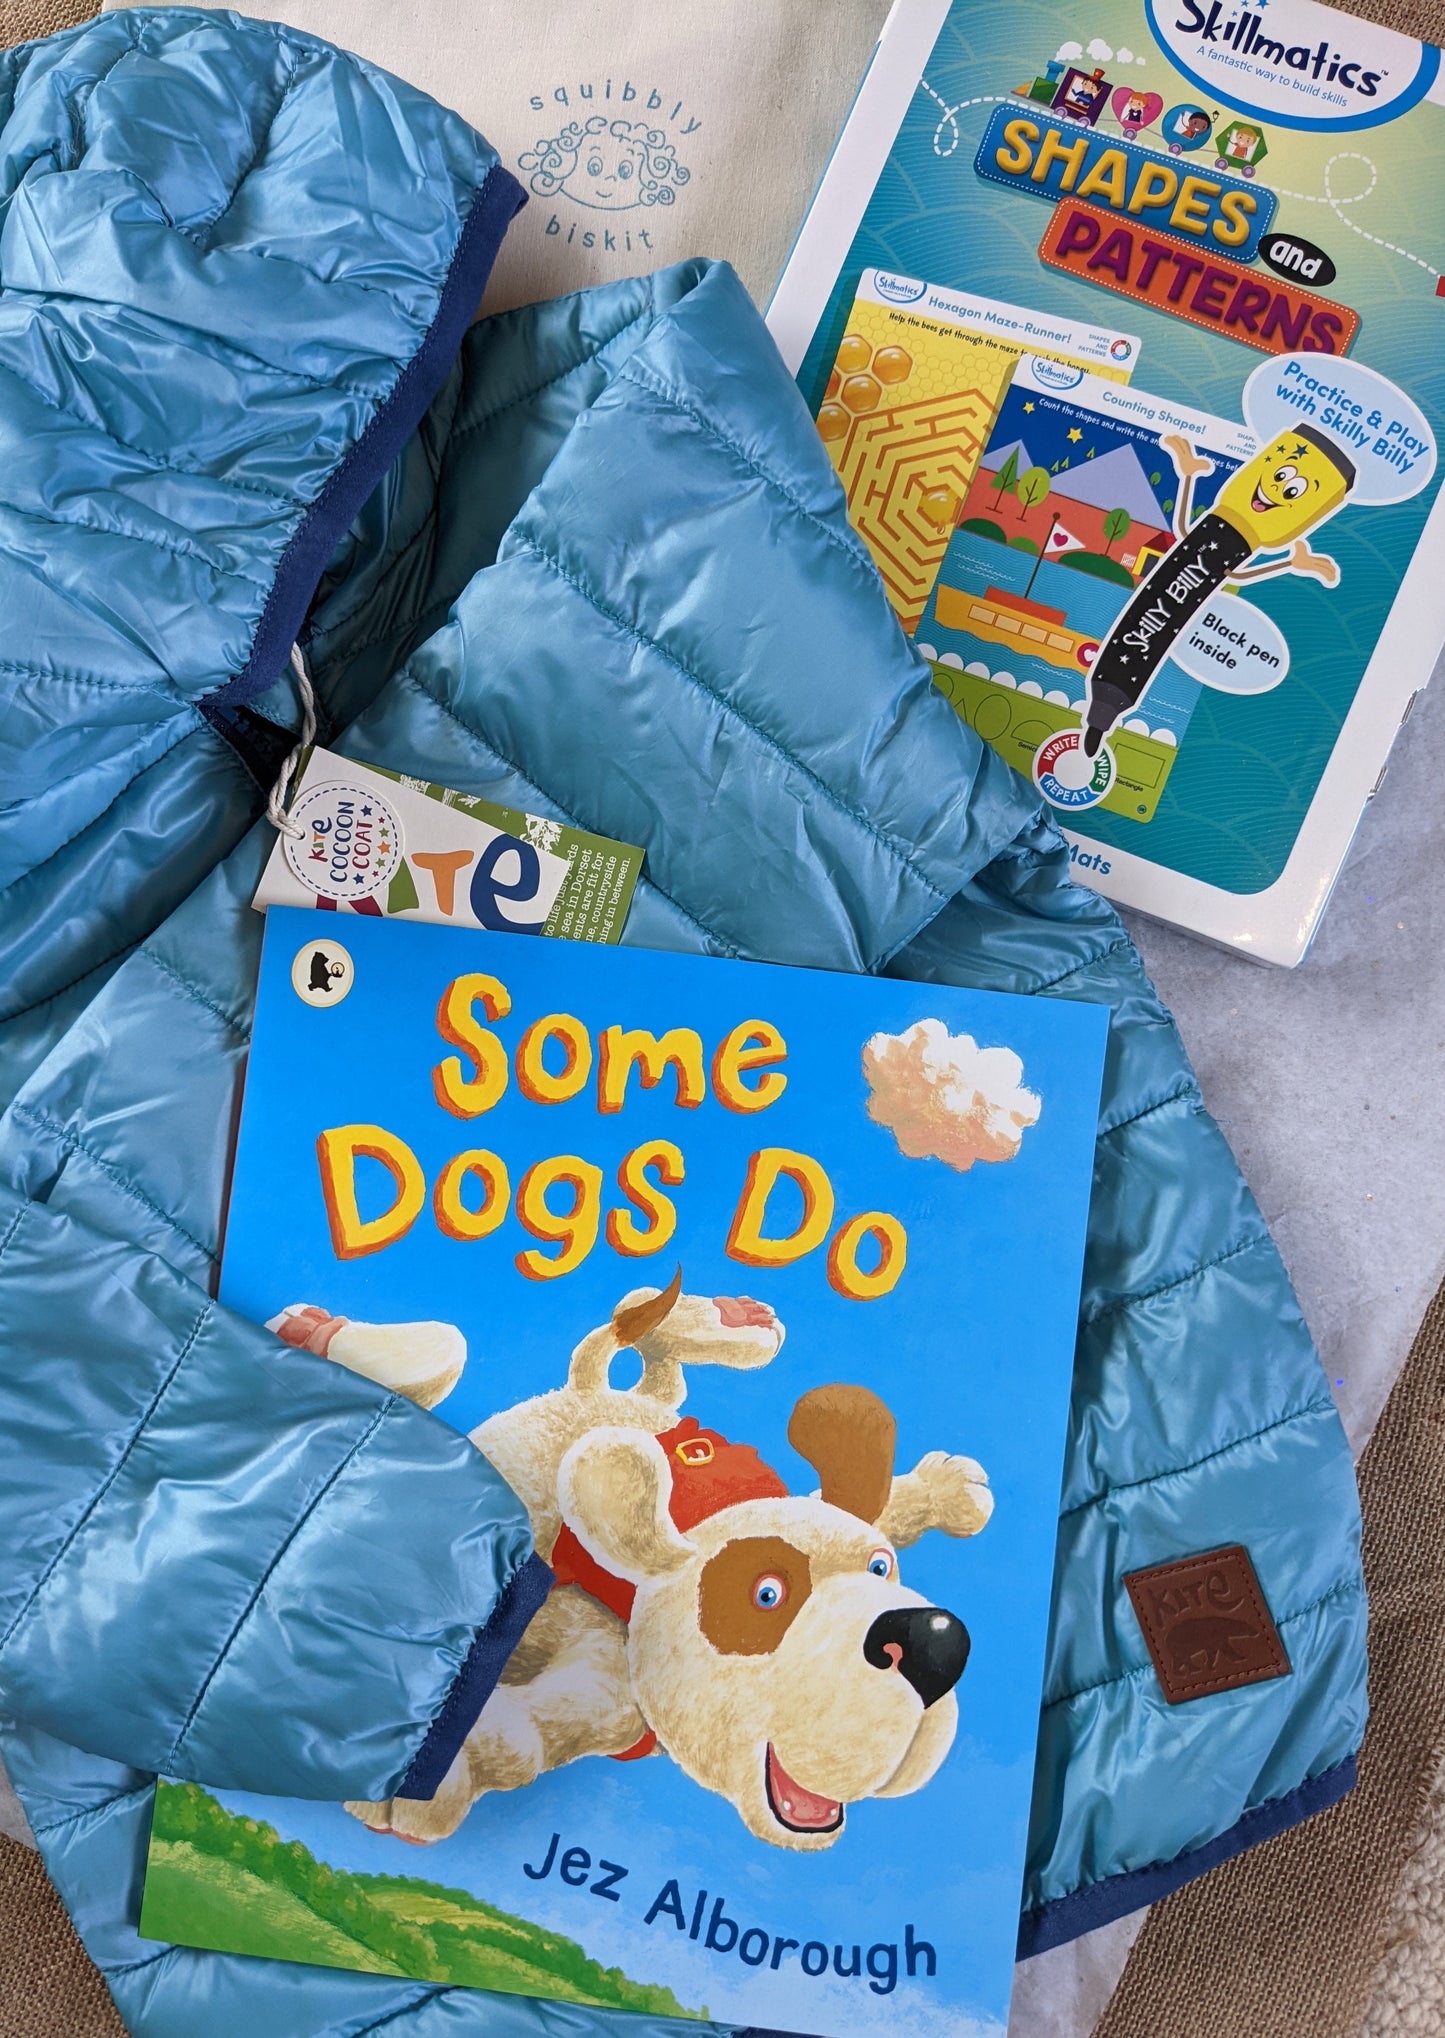 3 year old Gift Bag - Kite jacket, game and book